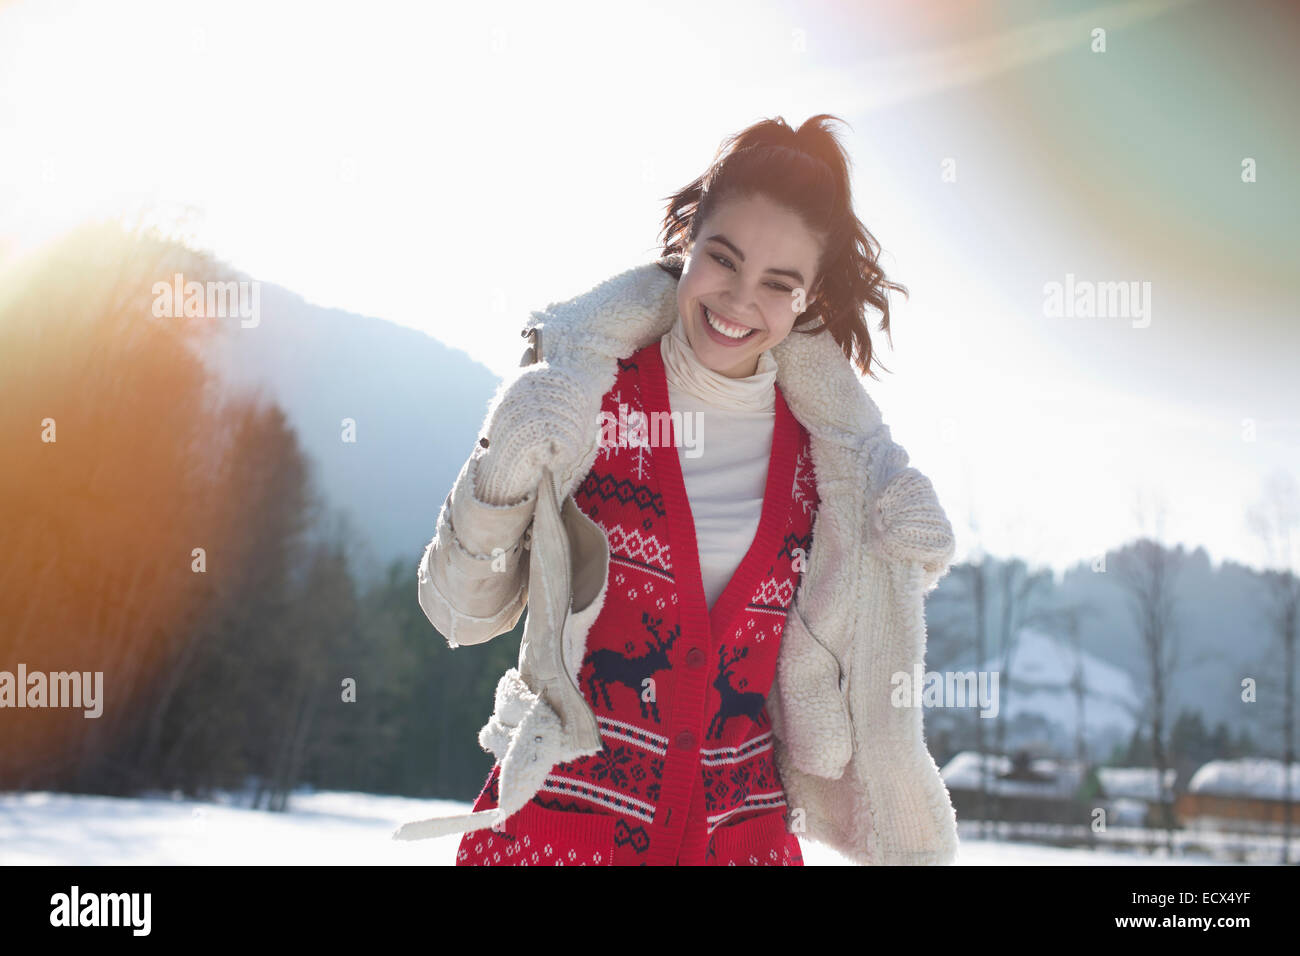 Smiling woman in snowy field Banque D'Images